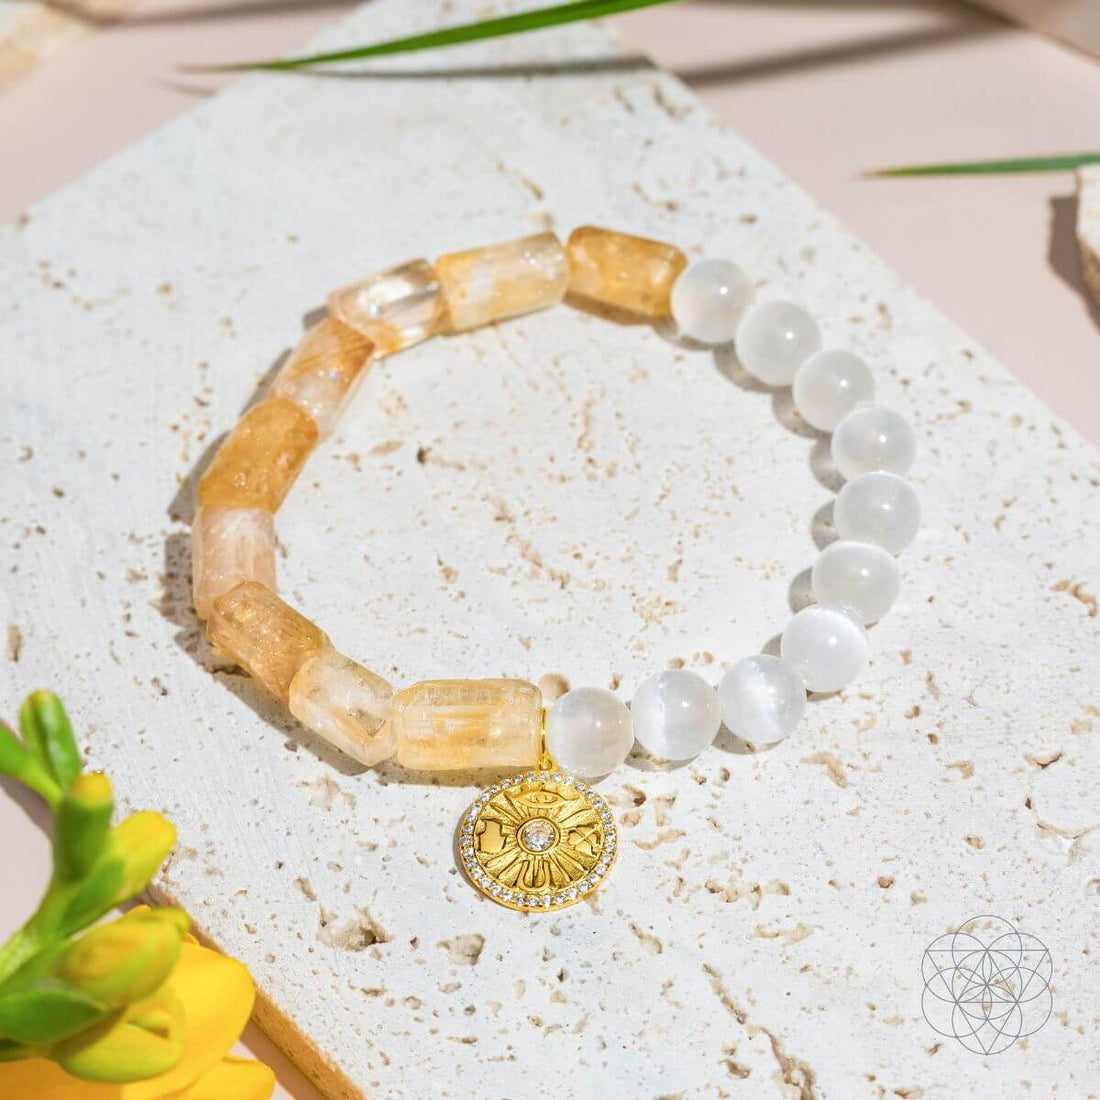 Solar system bracelets and their meaning – Conscious Items